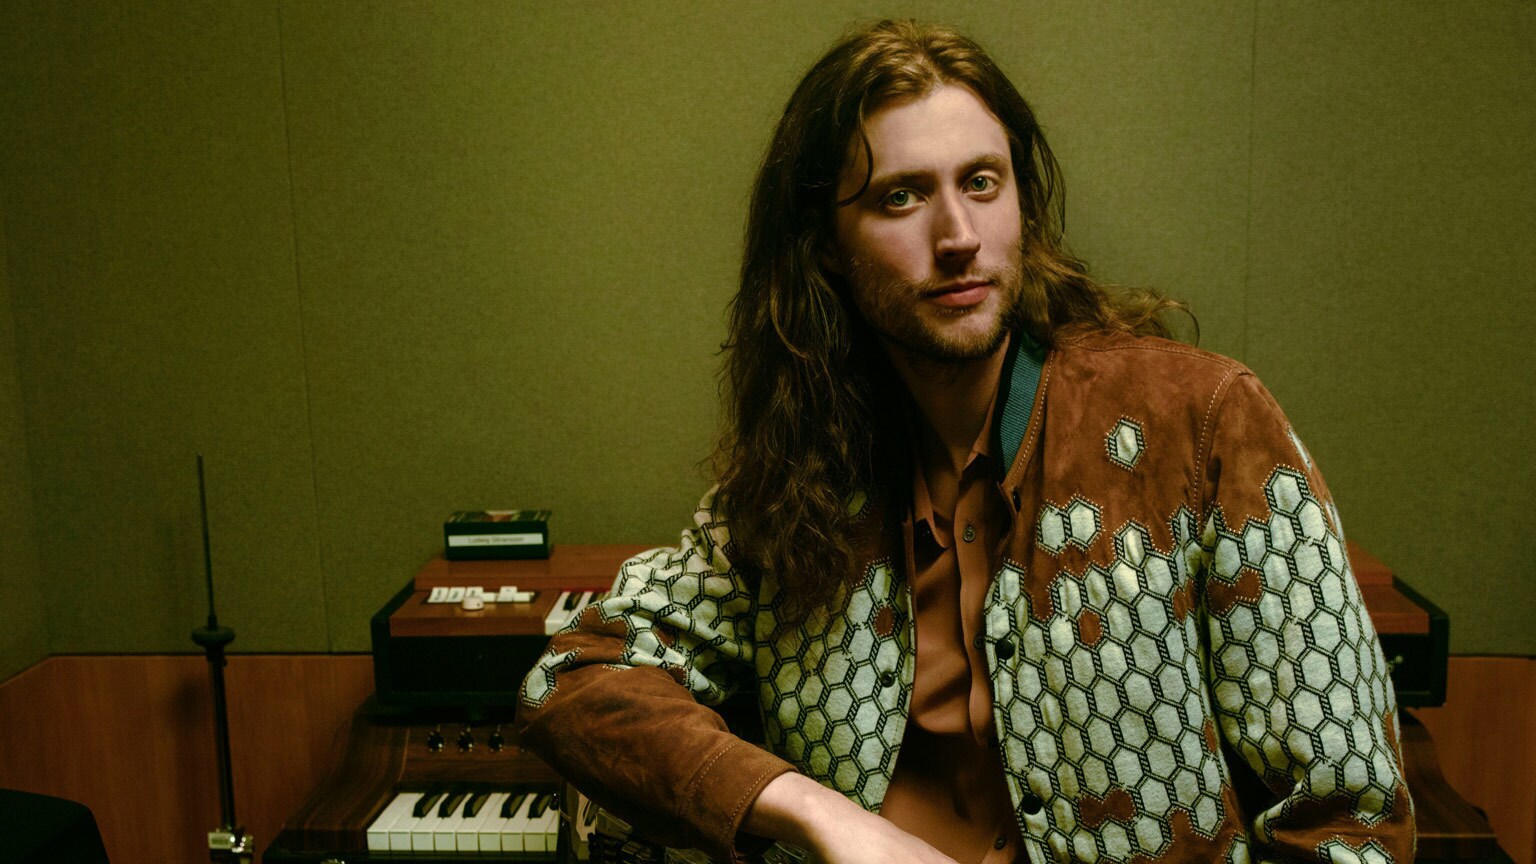 Ludwig Göransson to Compose Score for The Mandalorian